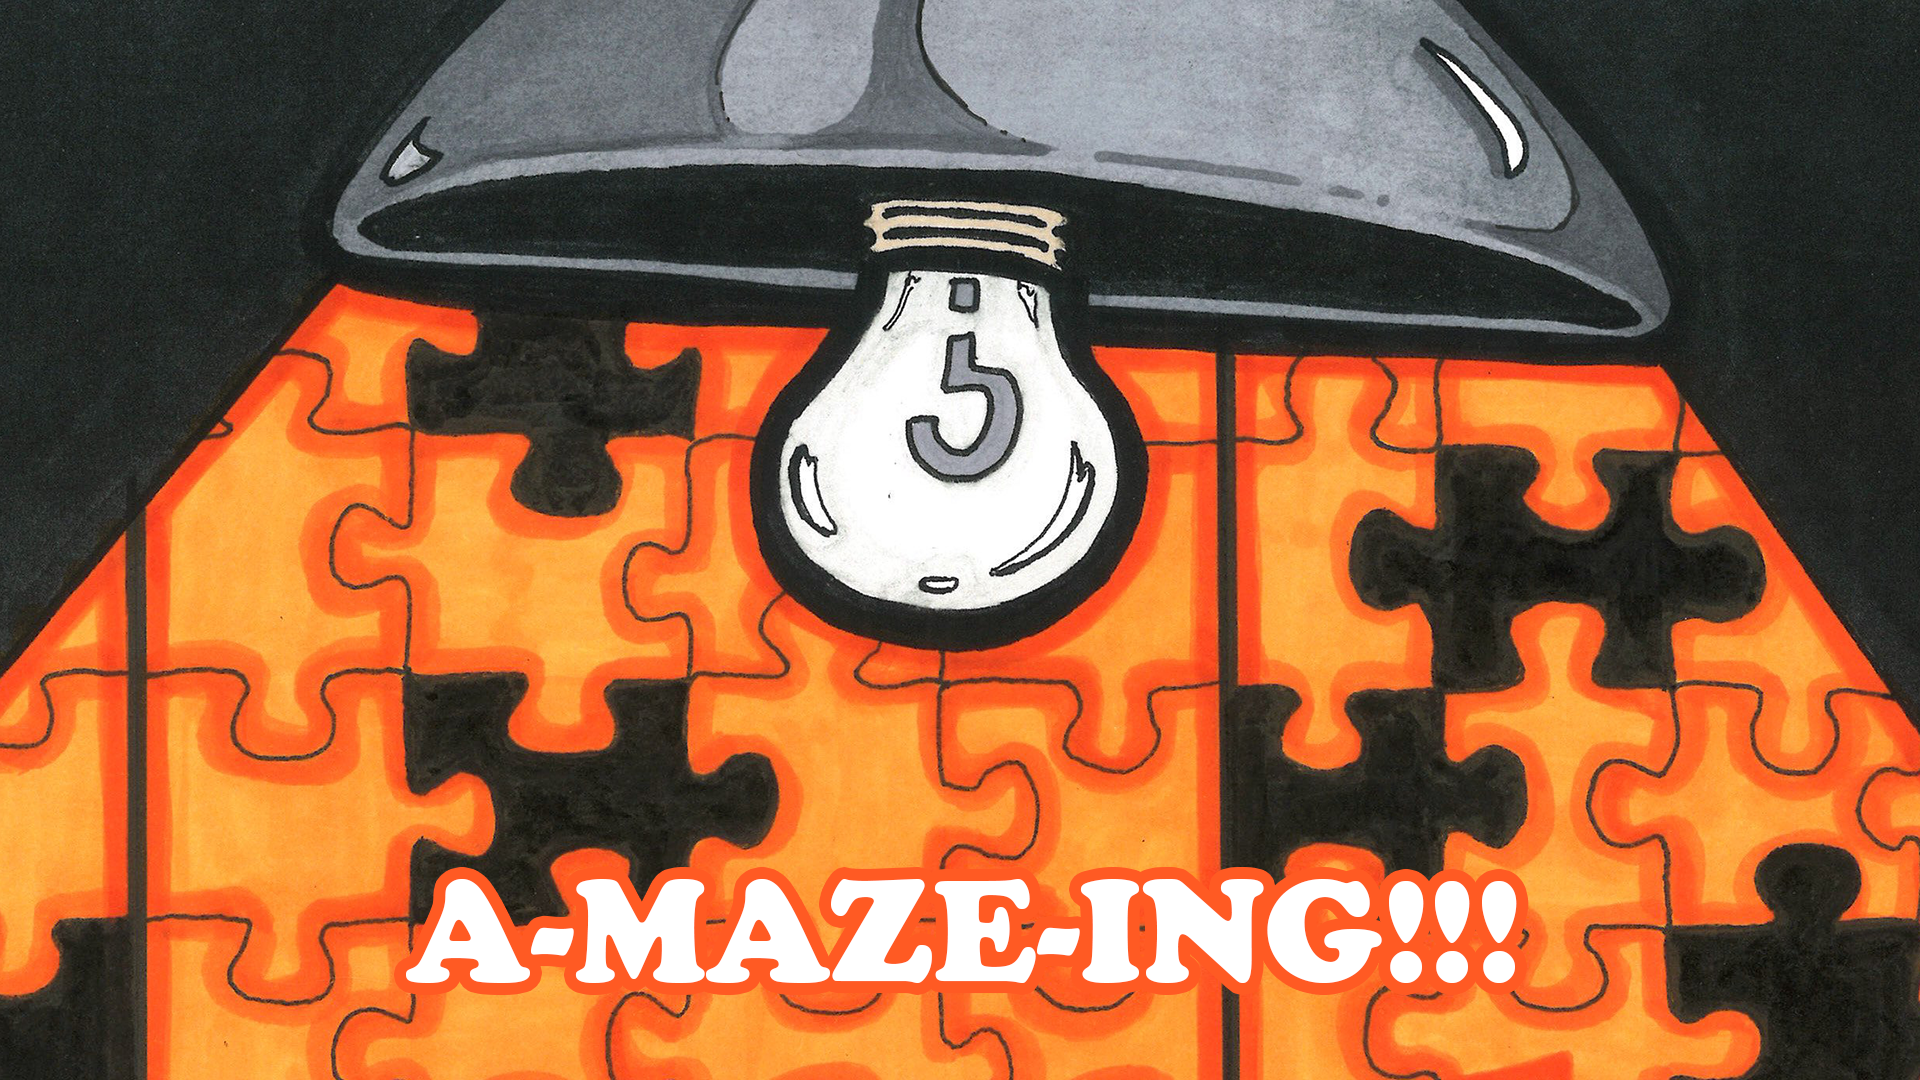 Icon for A-MAZE-ING!